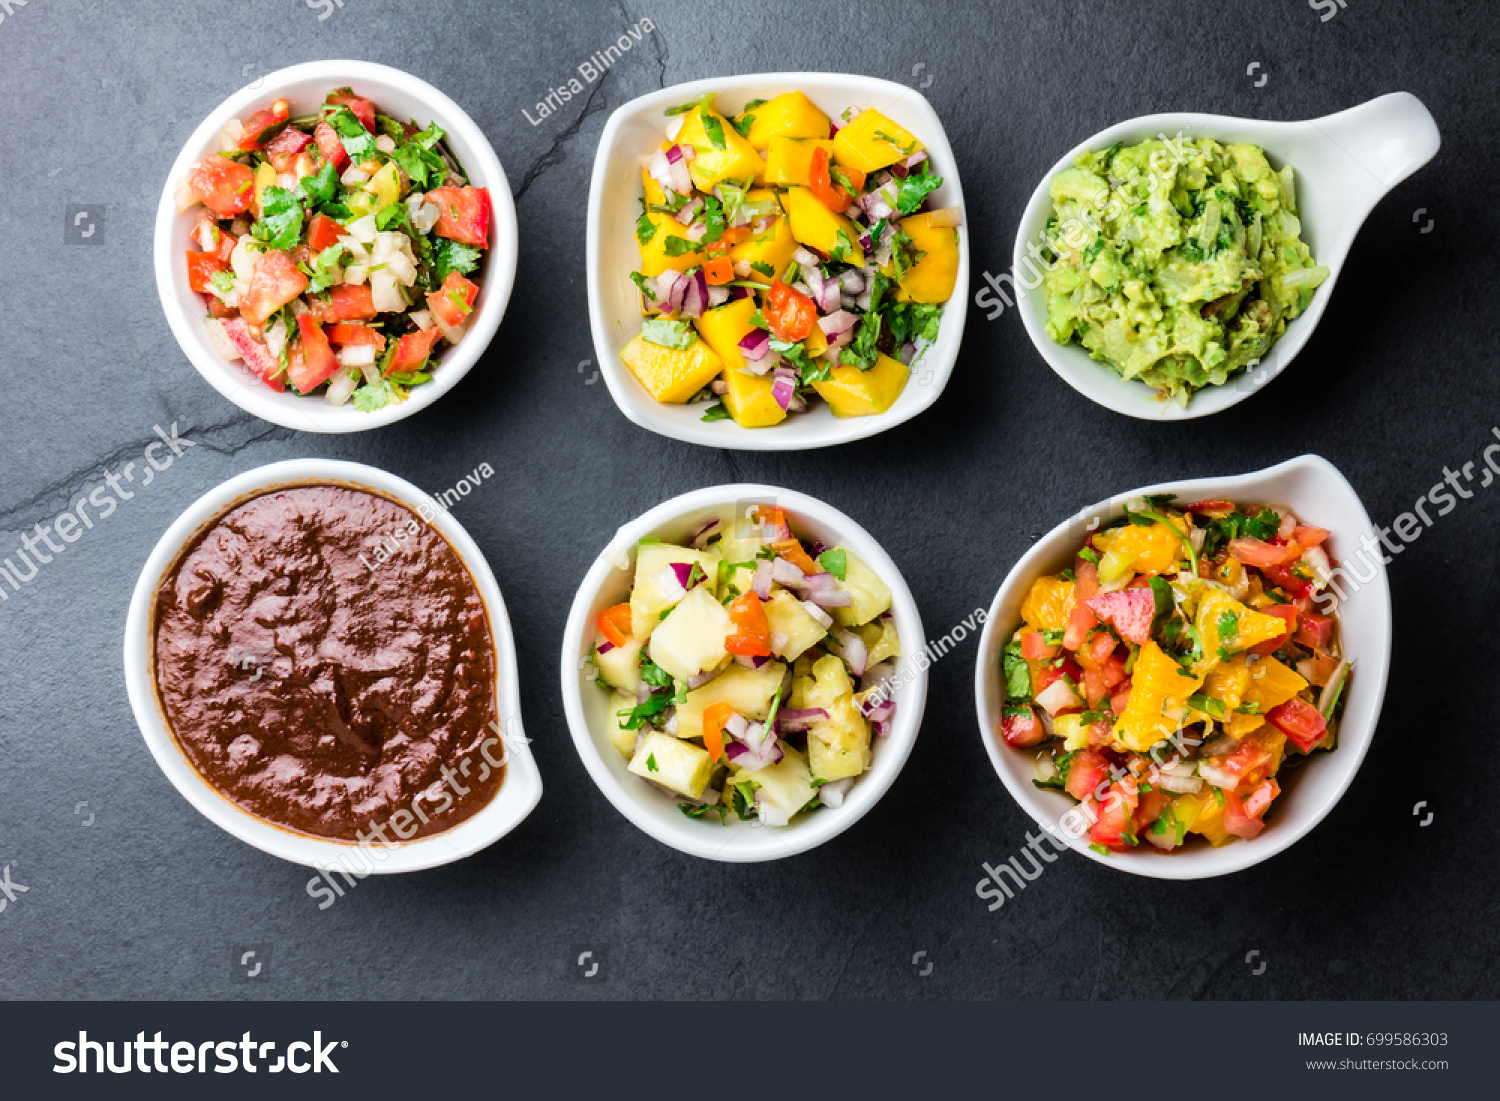 Traditional Famous Mexican Sauces Chocolate Chili Stock Photo Edit Now 699586303,2nd Anniversary Gift Ideas